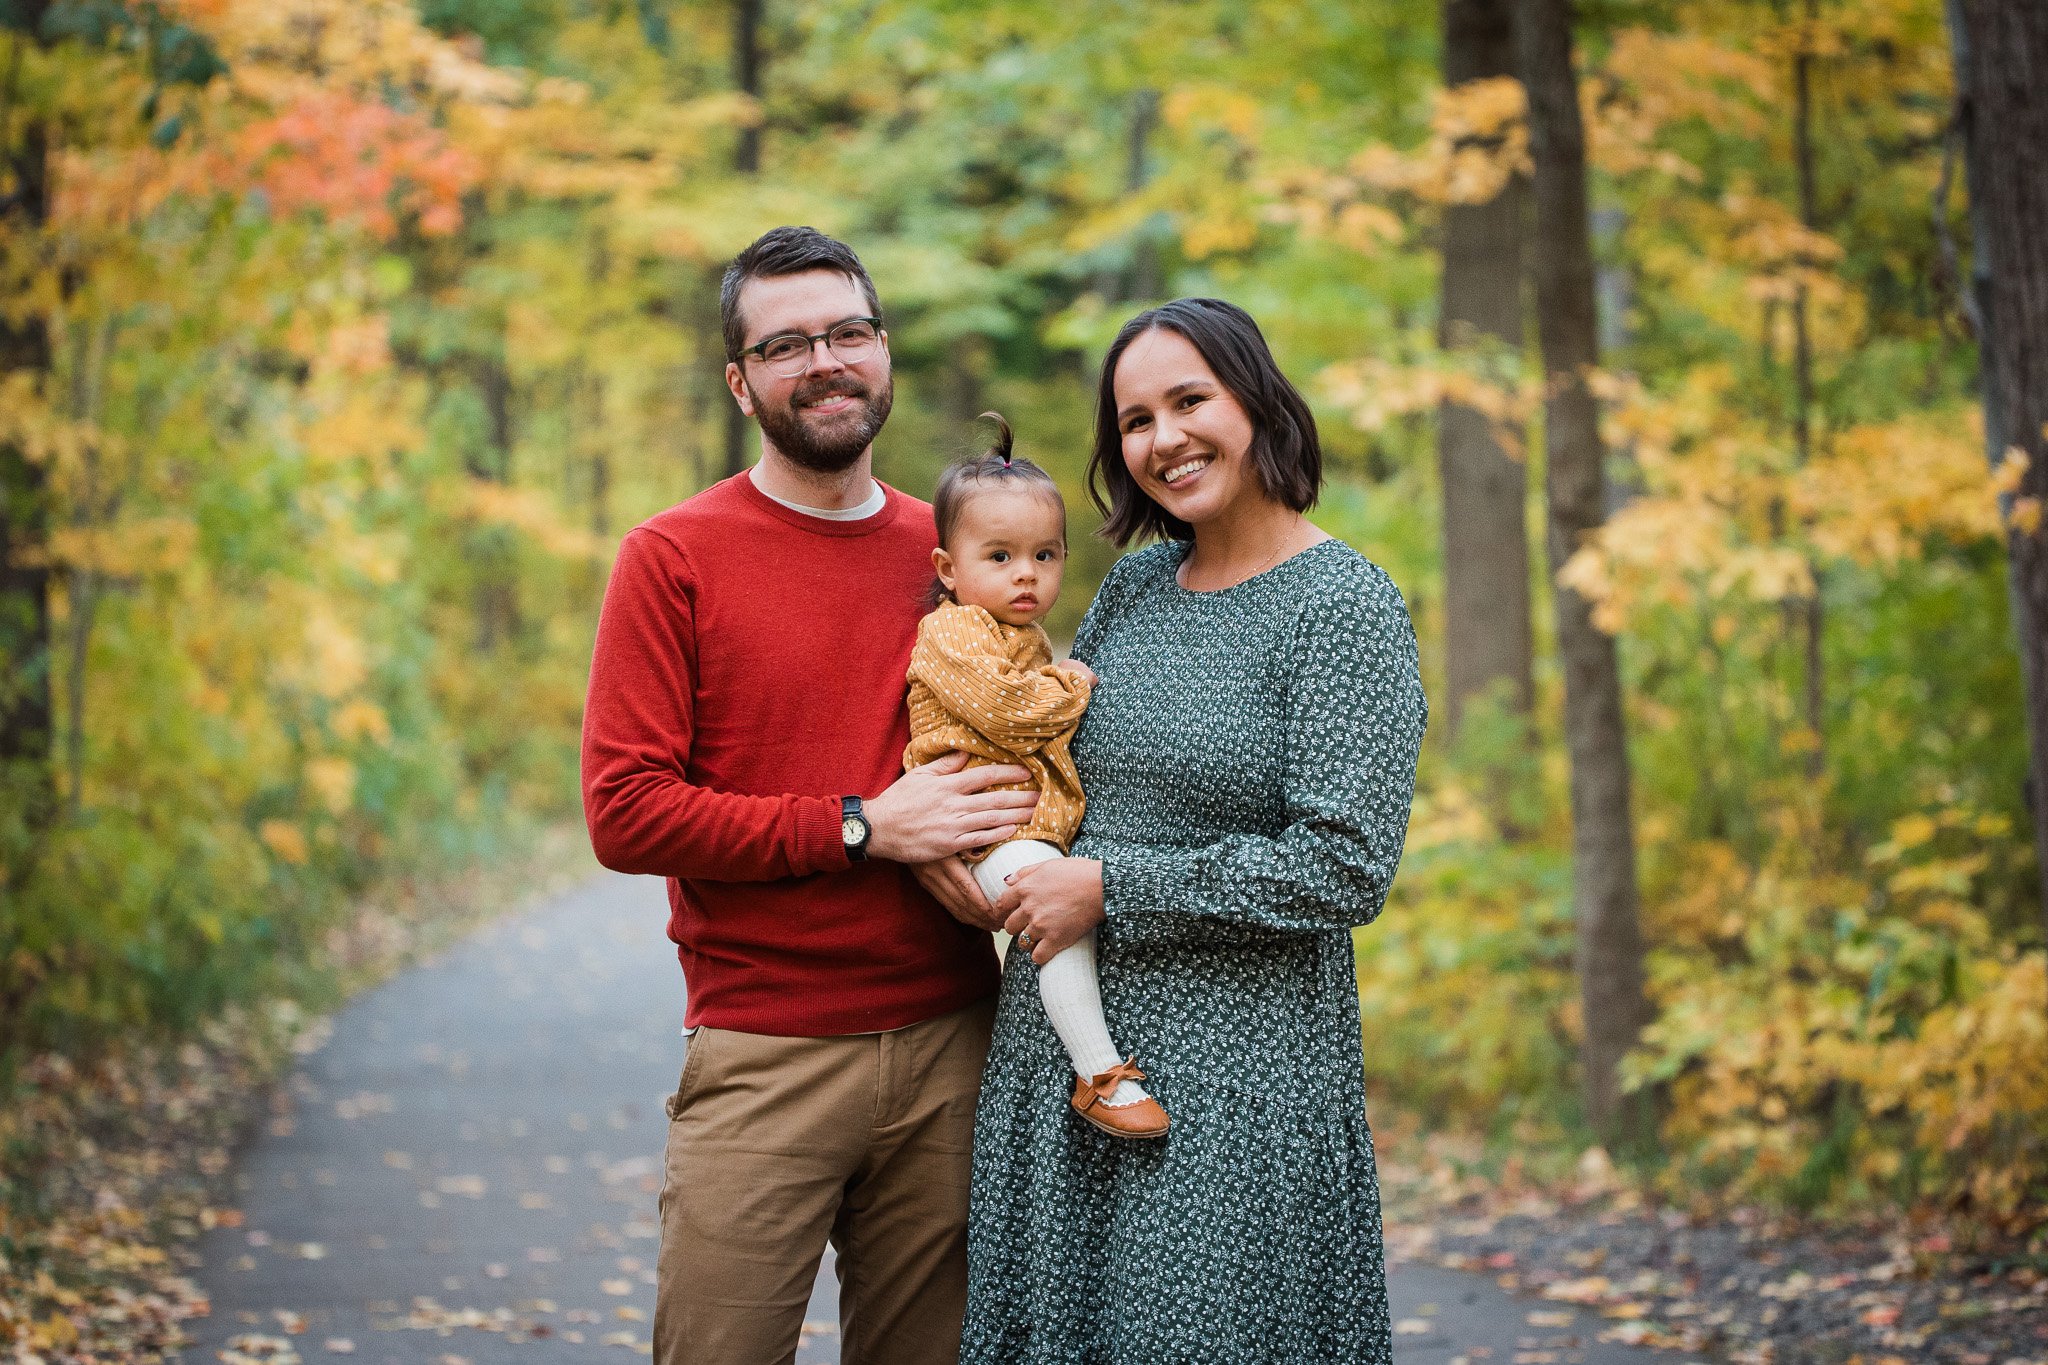 008_Michigan_Family_Photographer_Maybury_State_Park_Fall_Colors.jpg